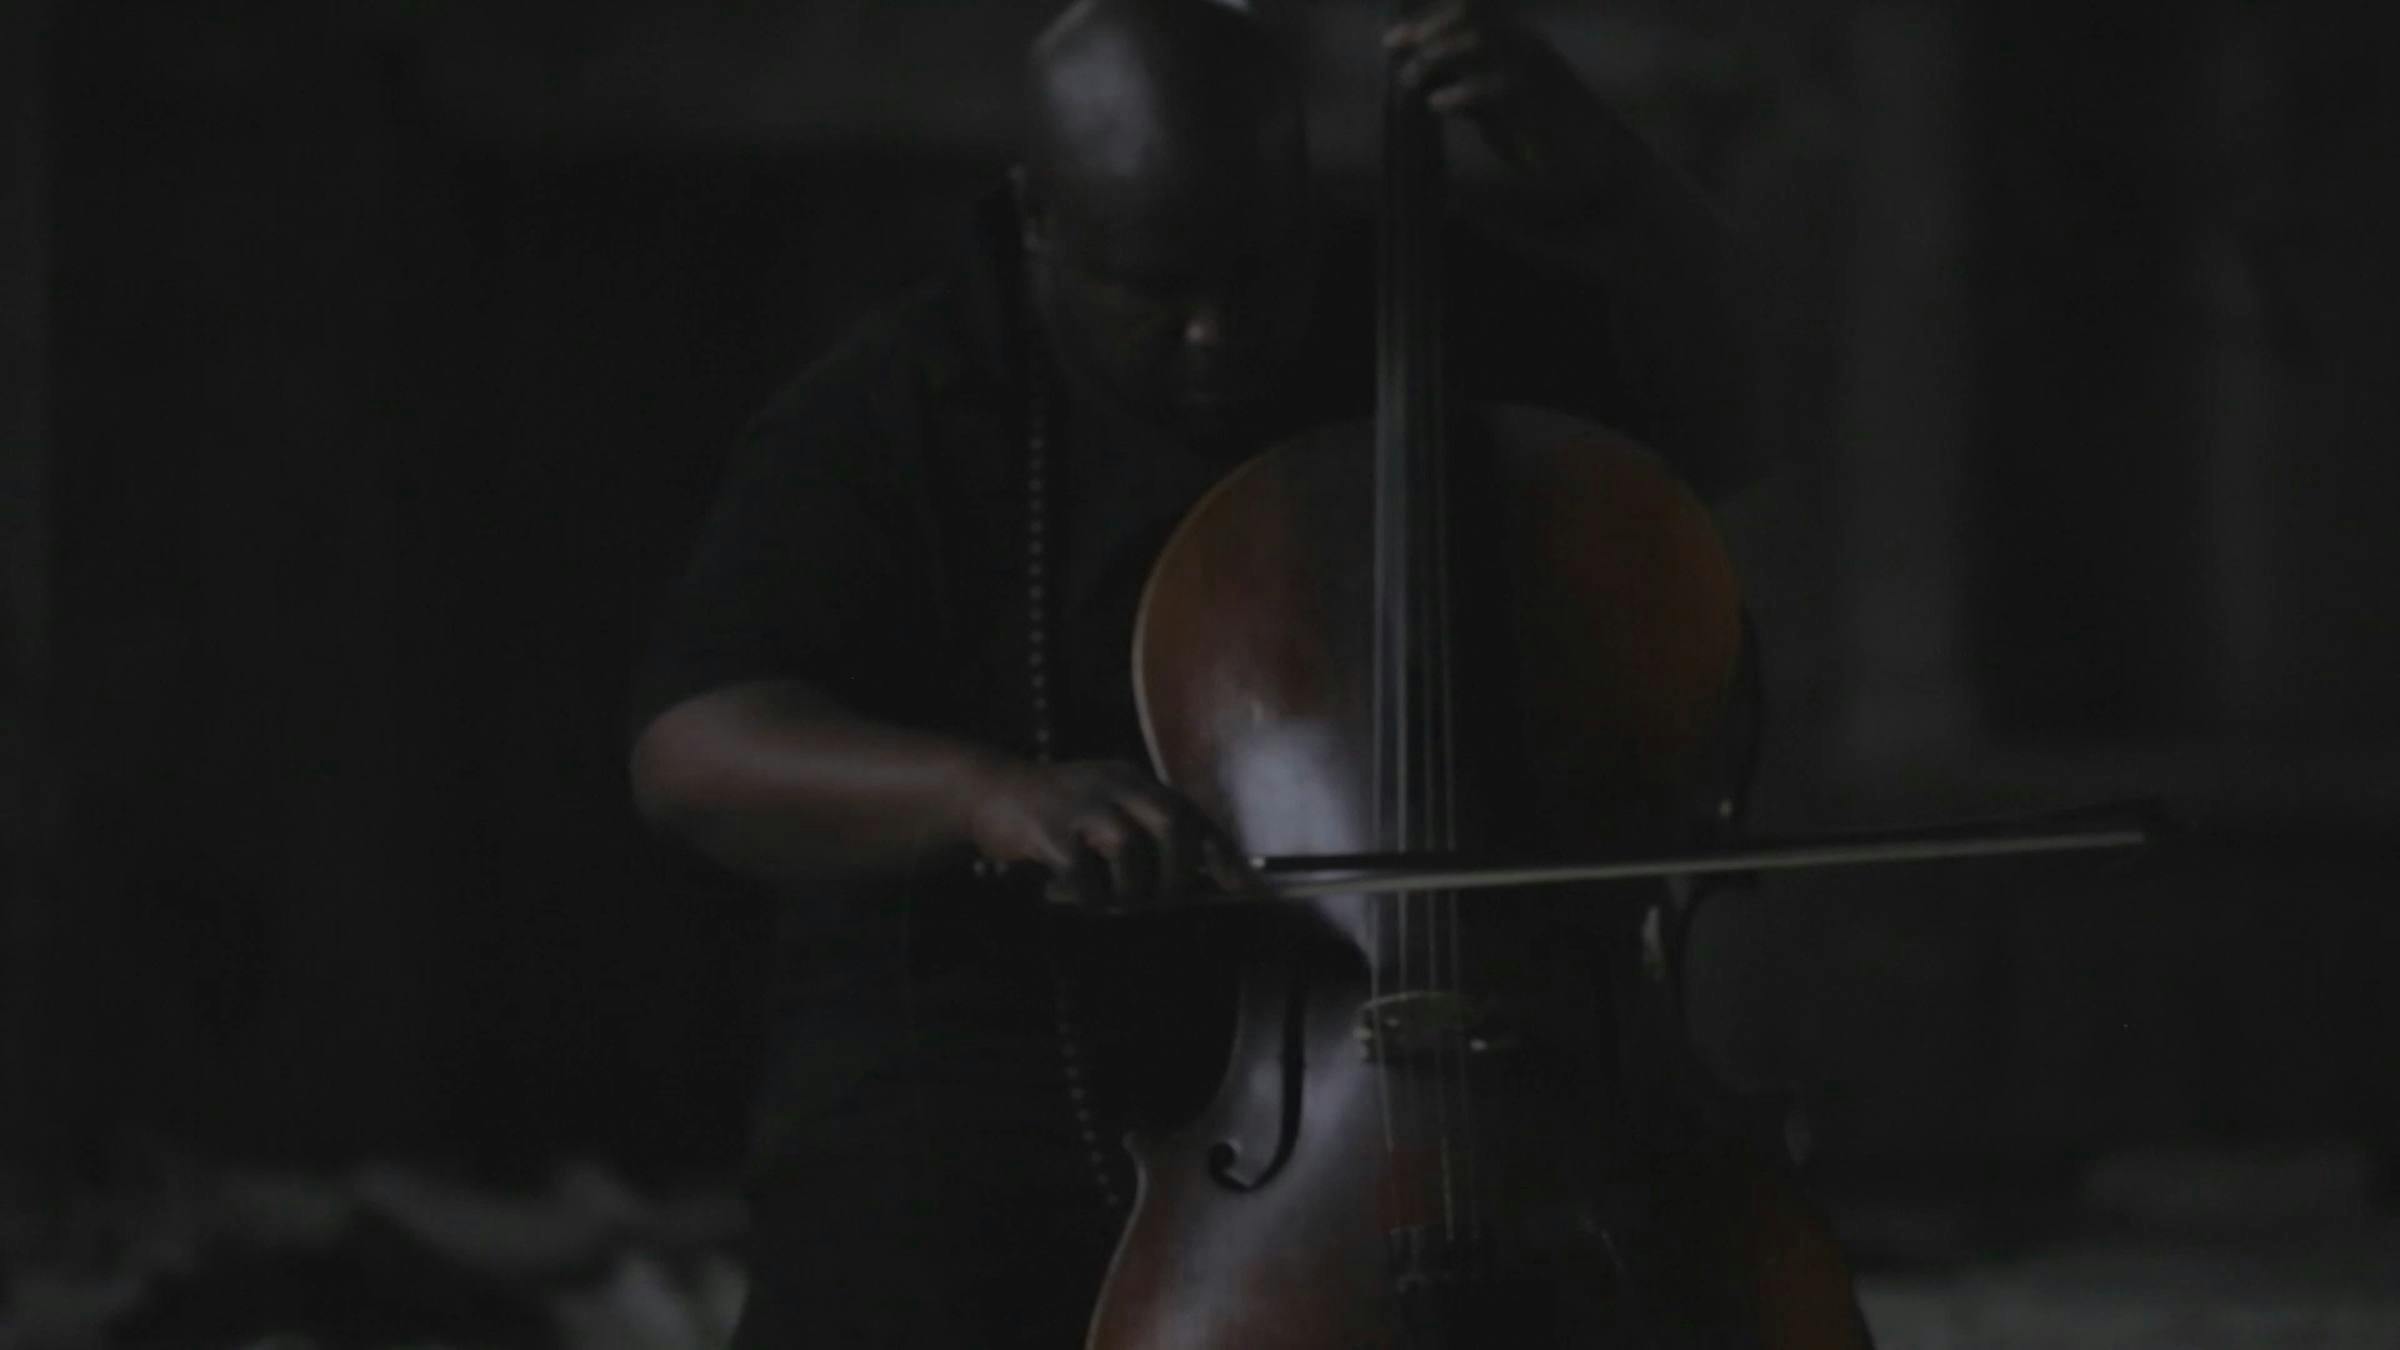 An image of a black person playing the cello